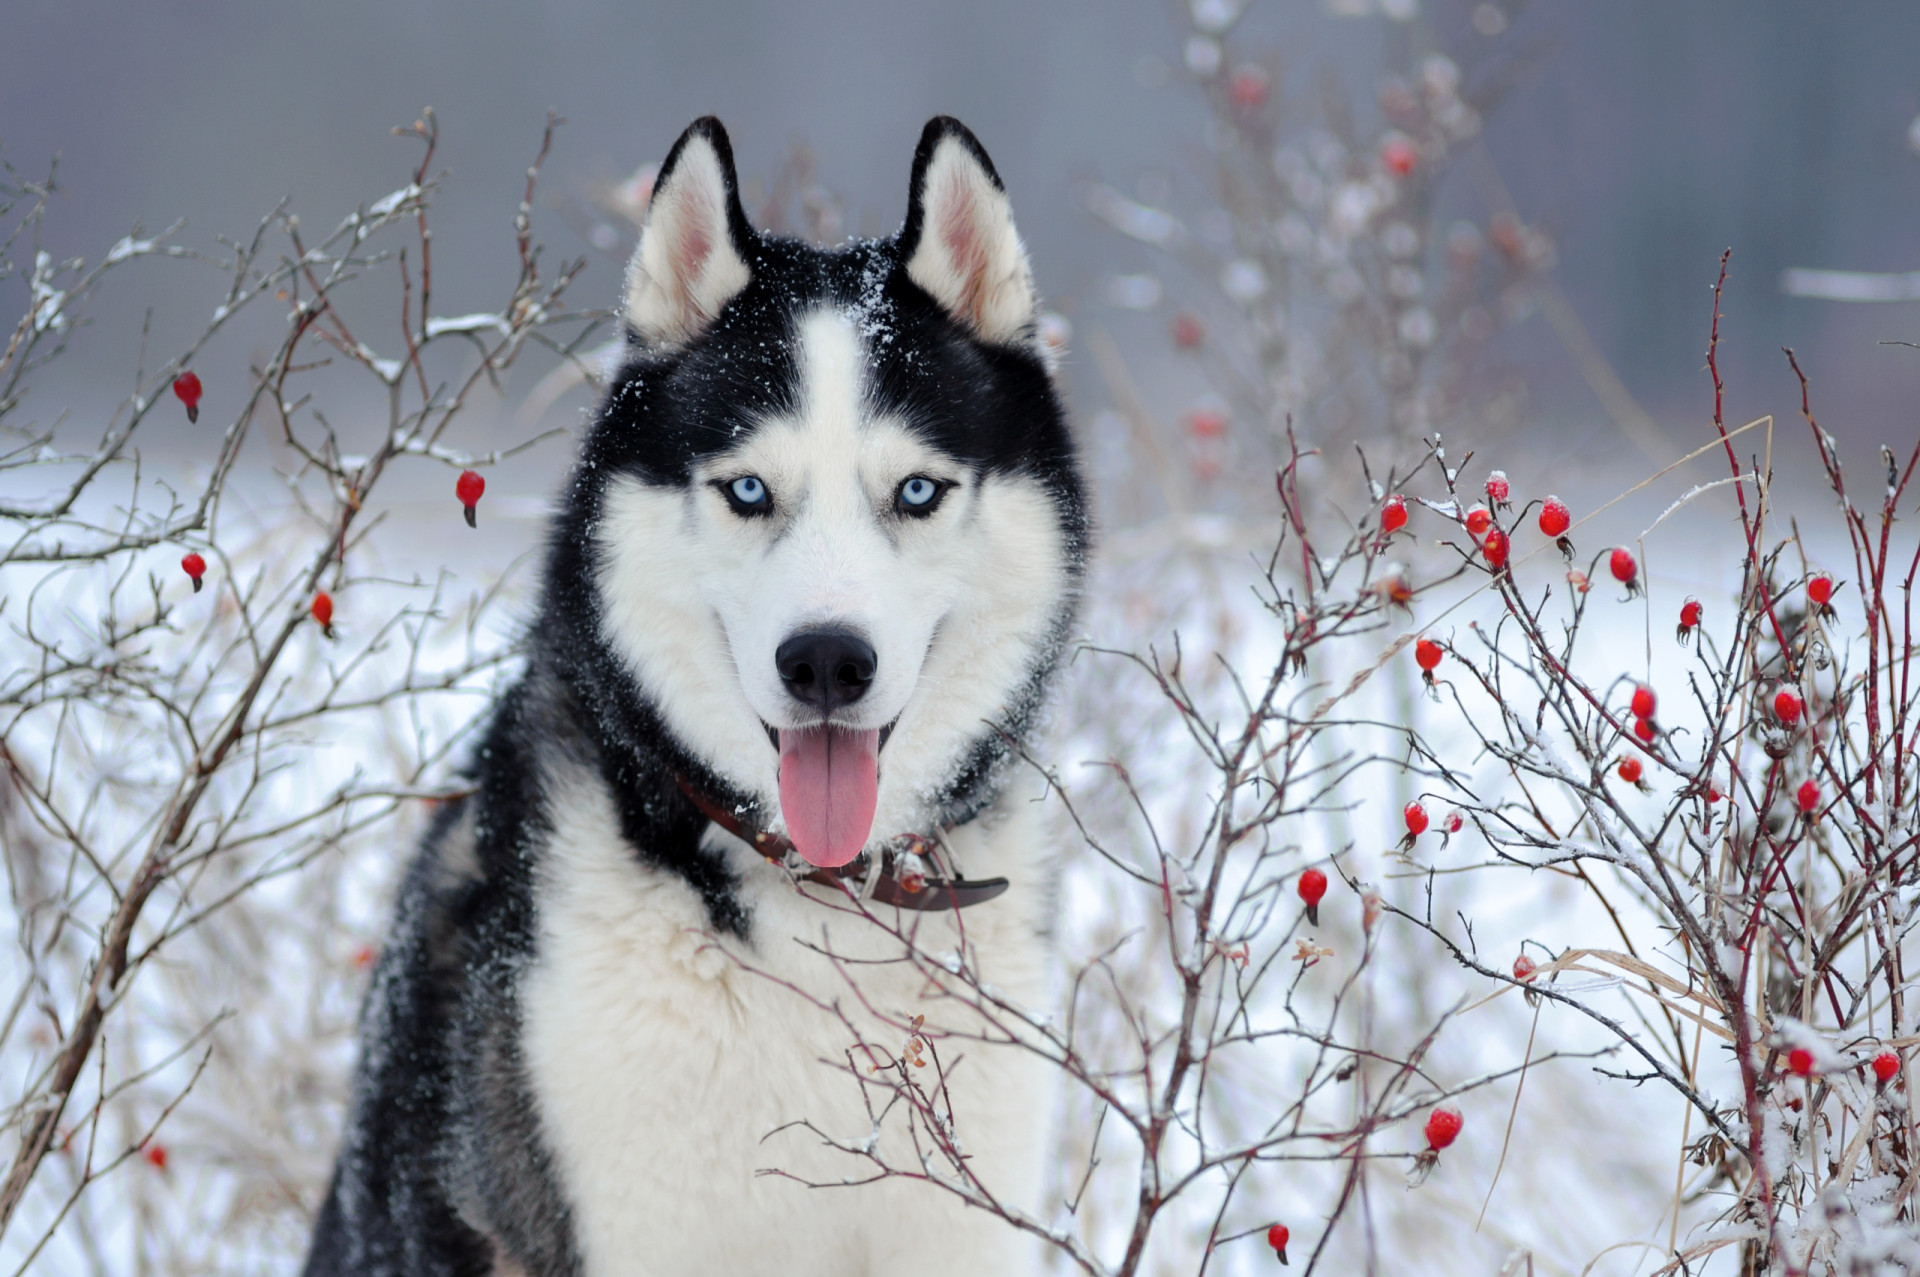 <p>Affectionate and sociable, Siberian Huskies are one of the healthiest dog breeds, and live to anywhere between 12 and 14 years. </p><p><a href="https://www.msn.com/en-us/community/channel/vid-7xx8mnucu55yw63we9va2gwr7uihbxwc68fxqp25x6tg4ftibpra?cvid=94631541bc0f4f89bfd59158d696ad7e">Follow us and access great exclusive content every day</a></p>